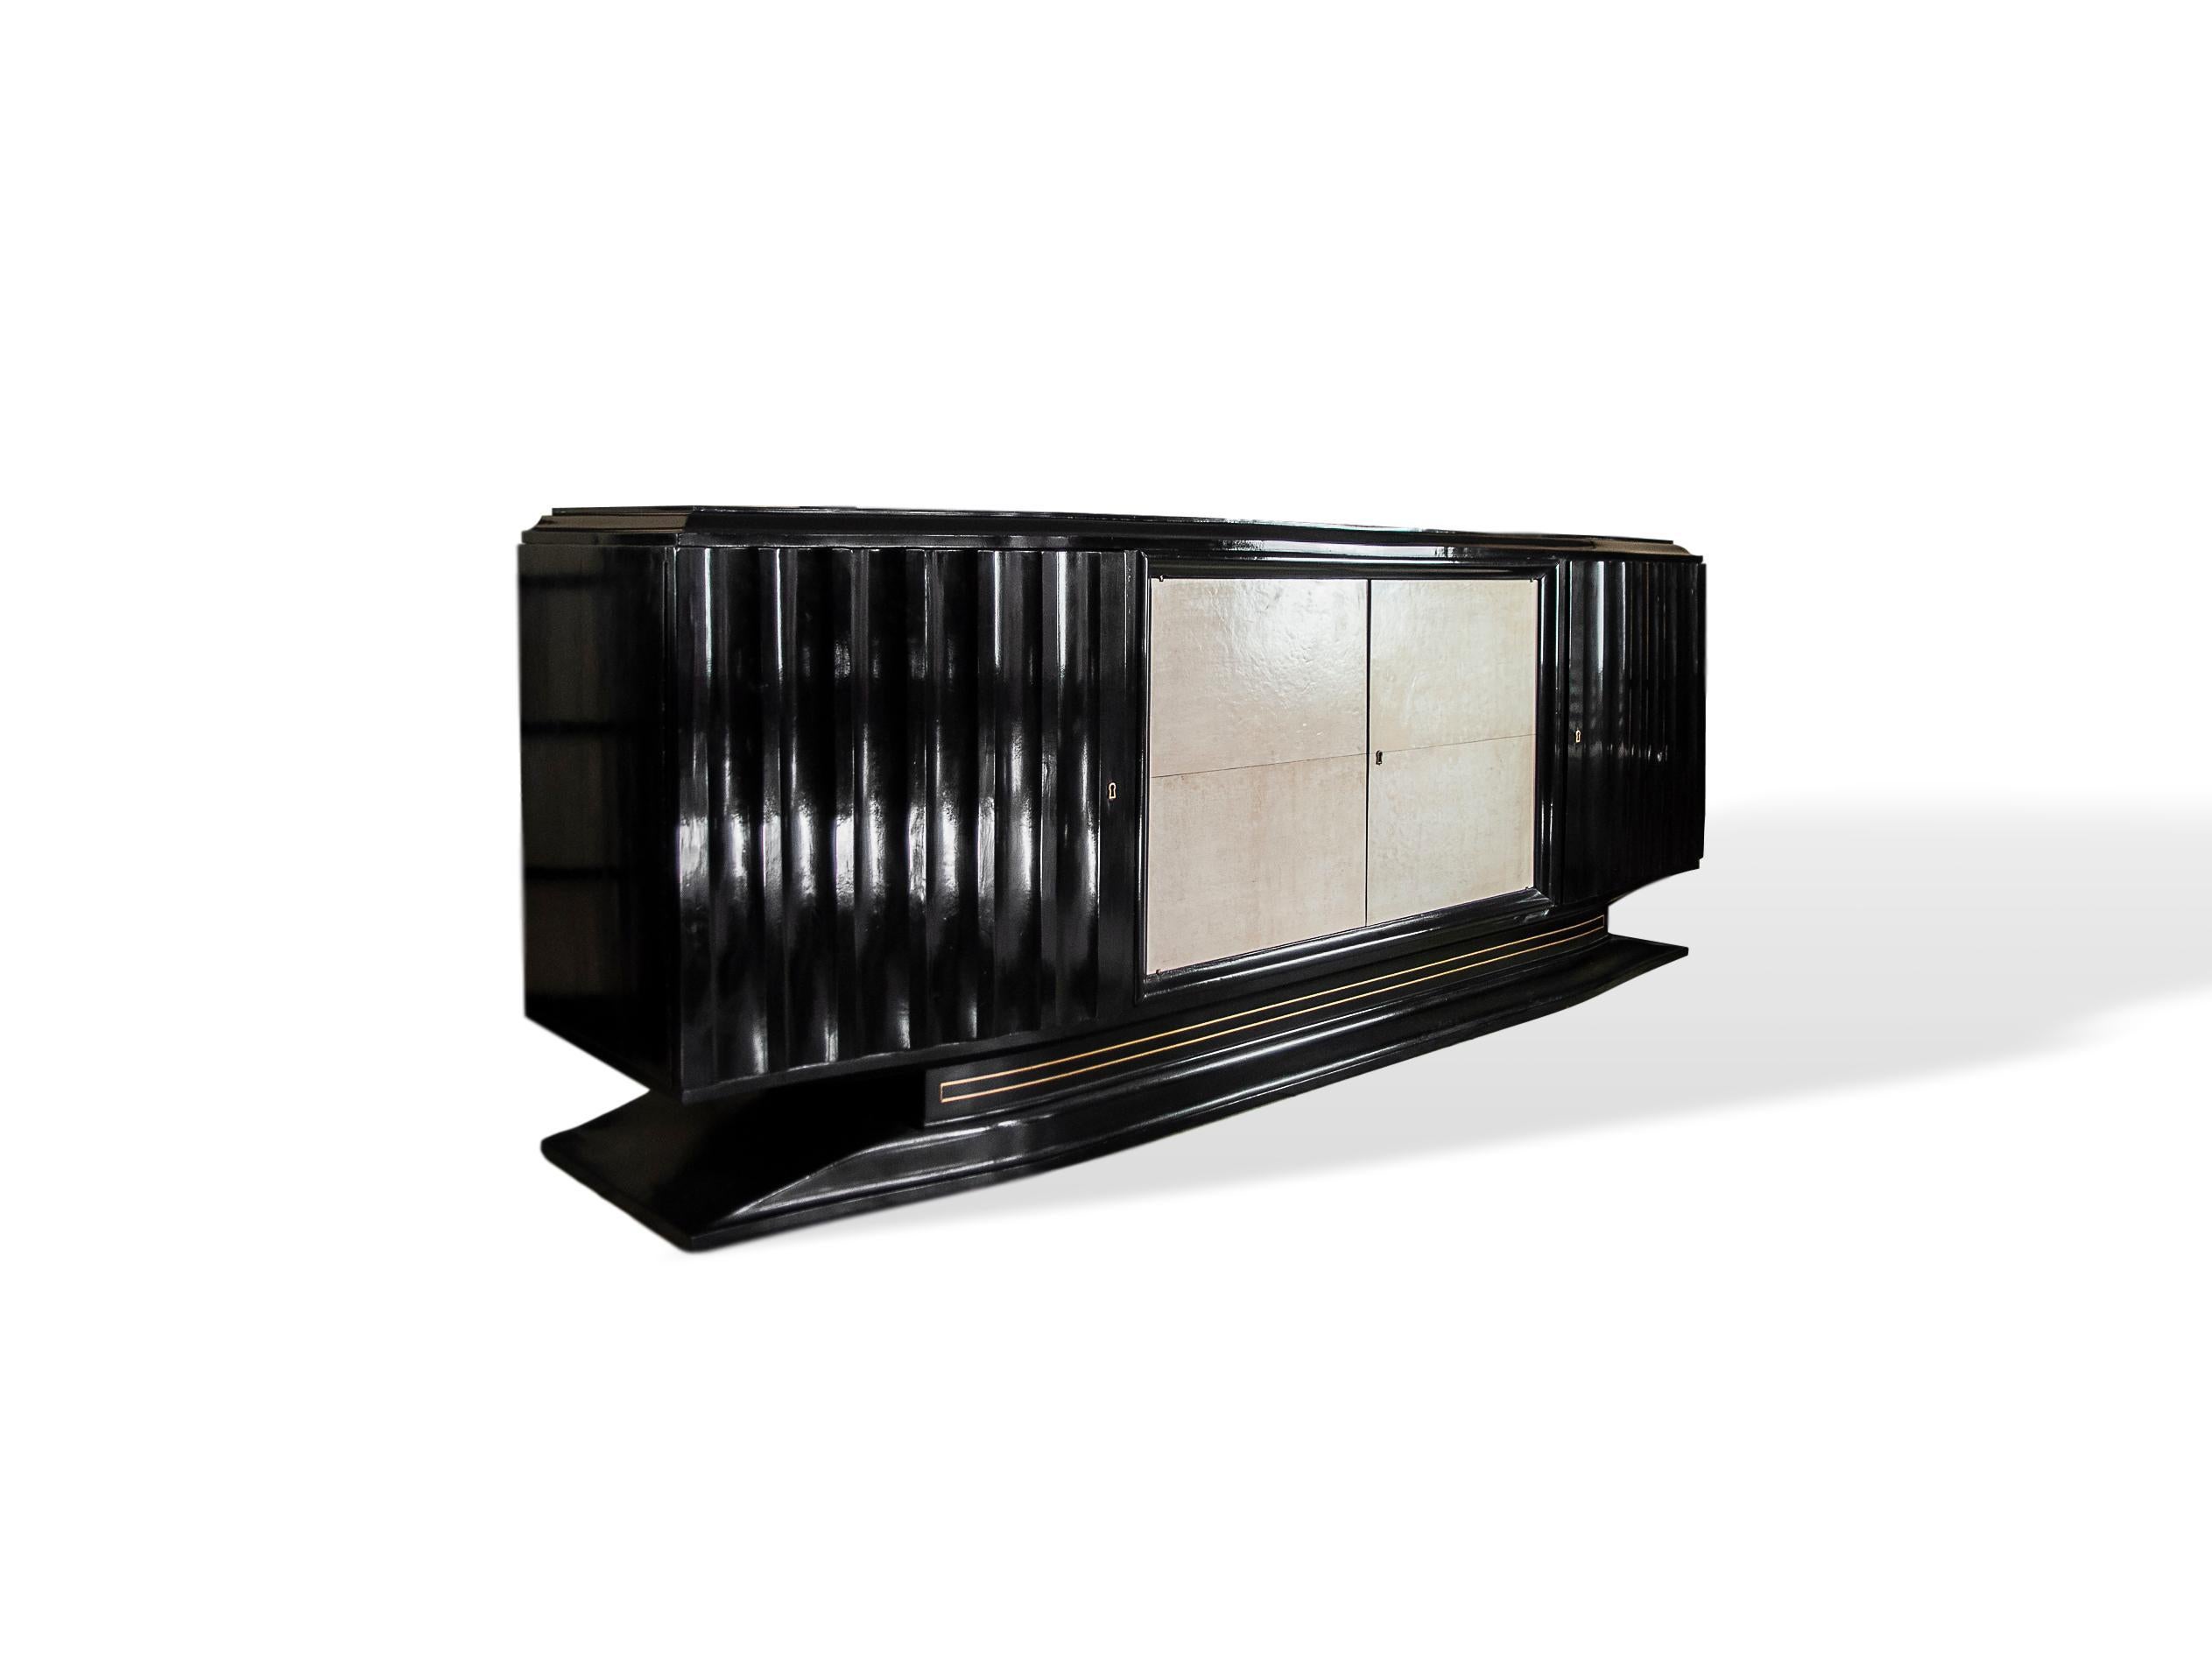 Mid-Century Modern Hollywood Regency Art Deco black lacquered and vellum sideboard, French, circa 1940, with inlaid bronze stringing, on a floating base.

Measures: D 22